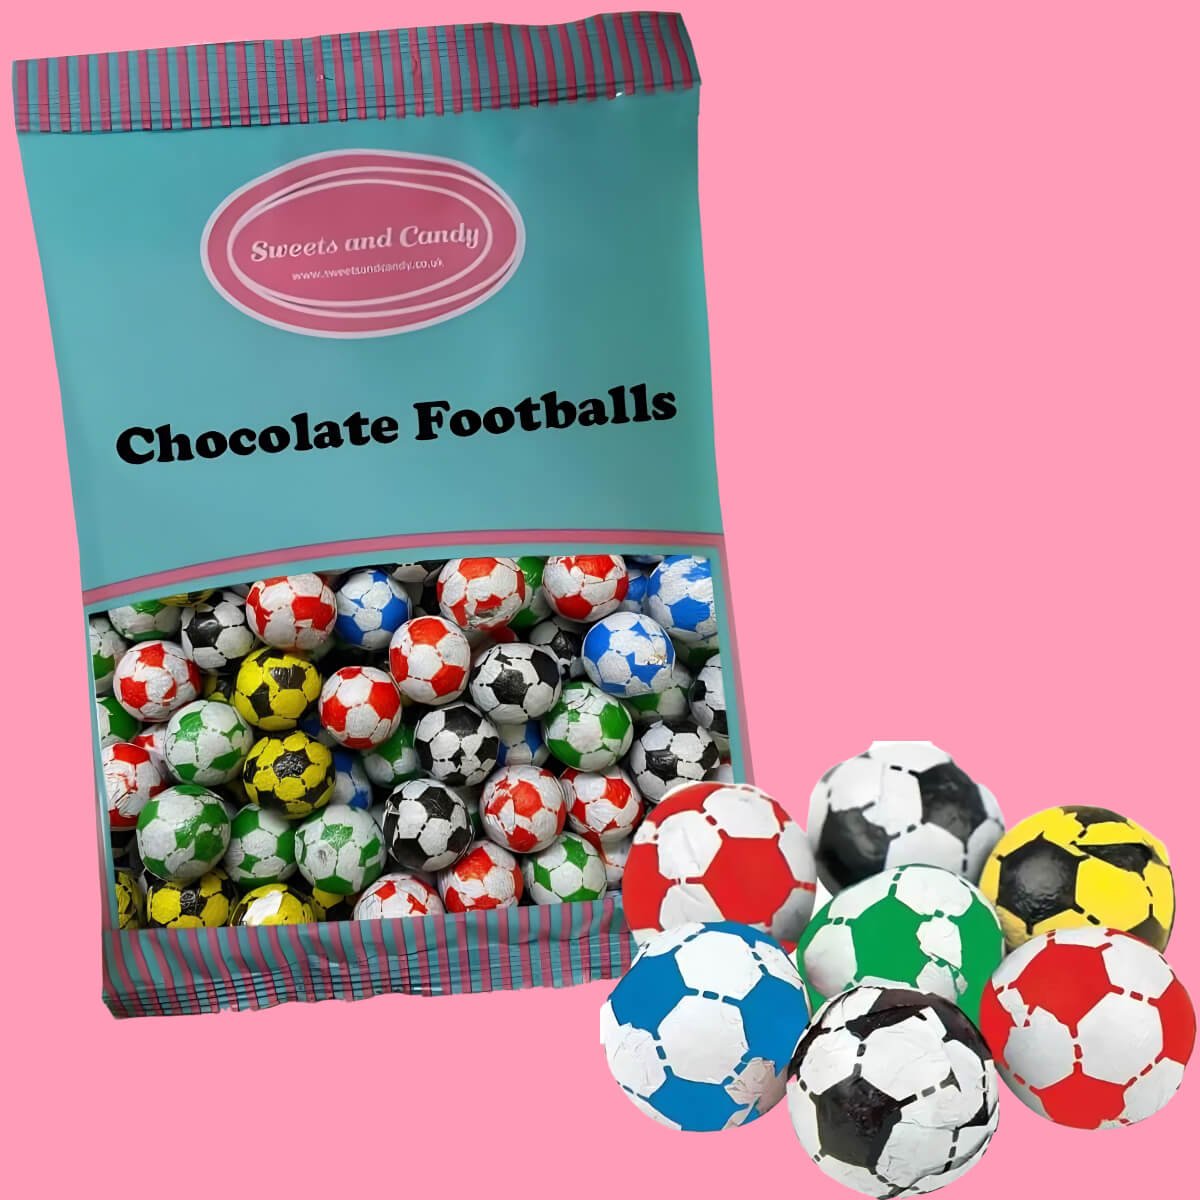 Bag of chocolate footballs with pink background